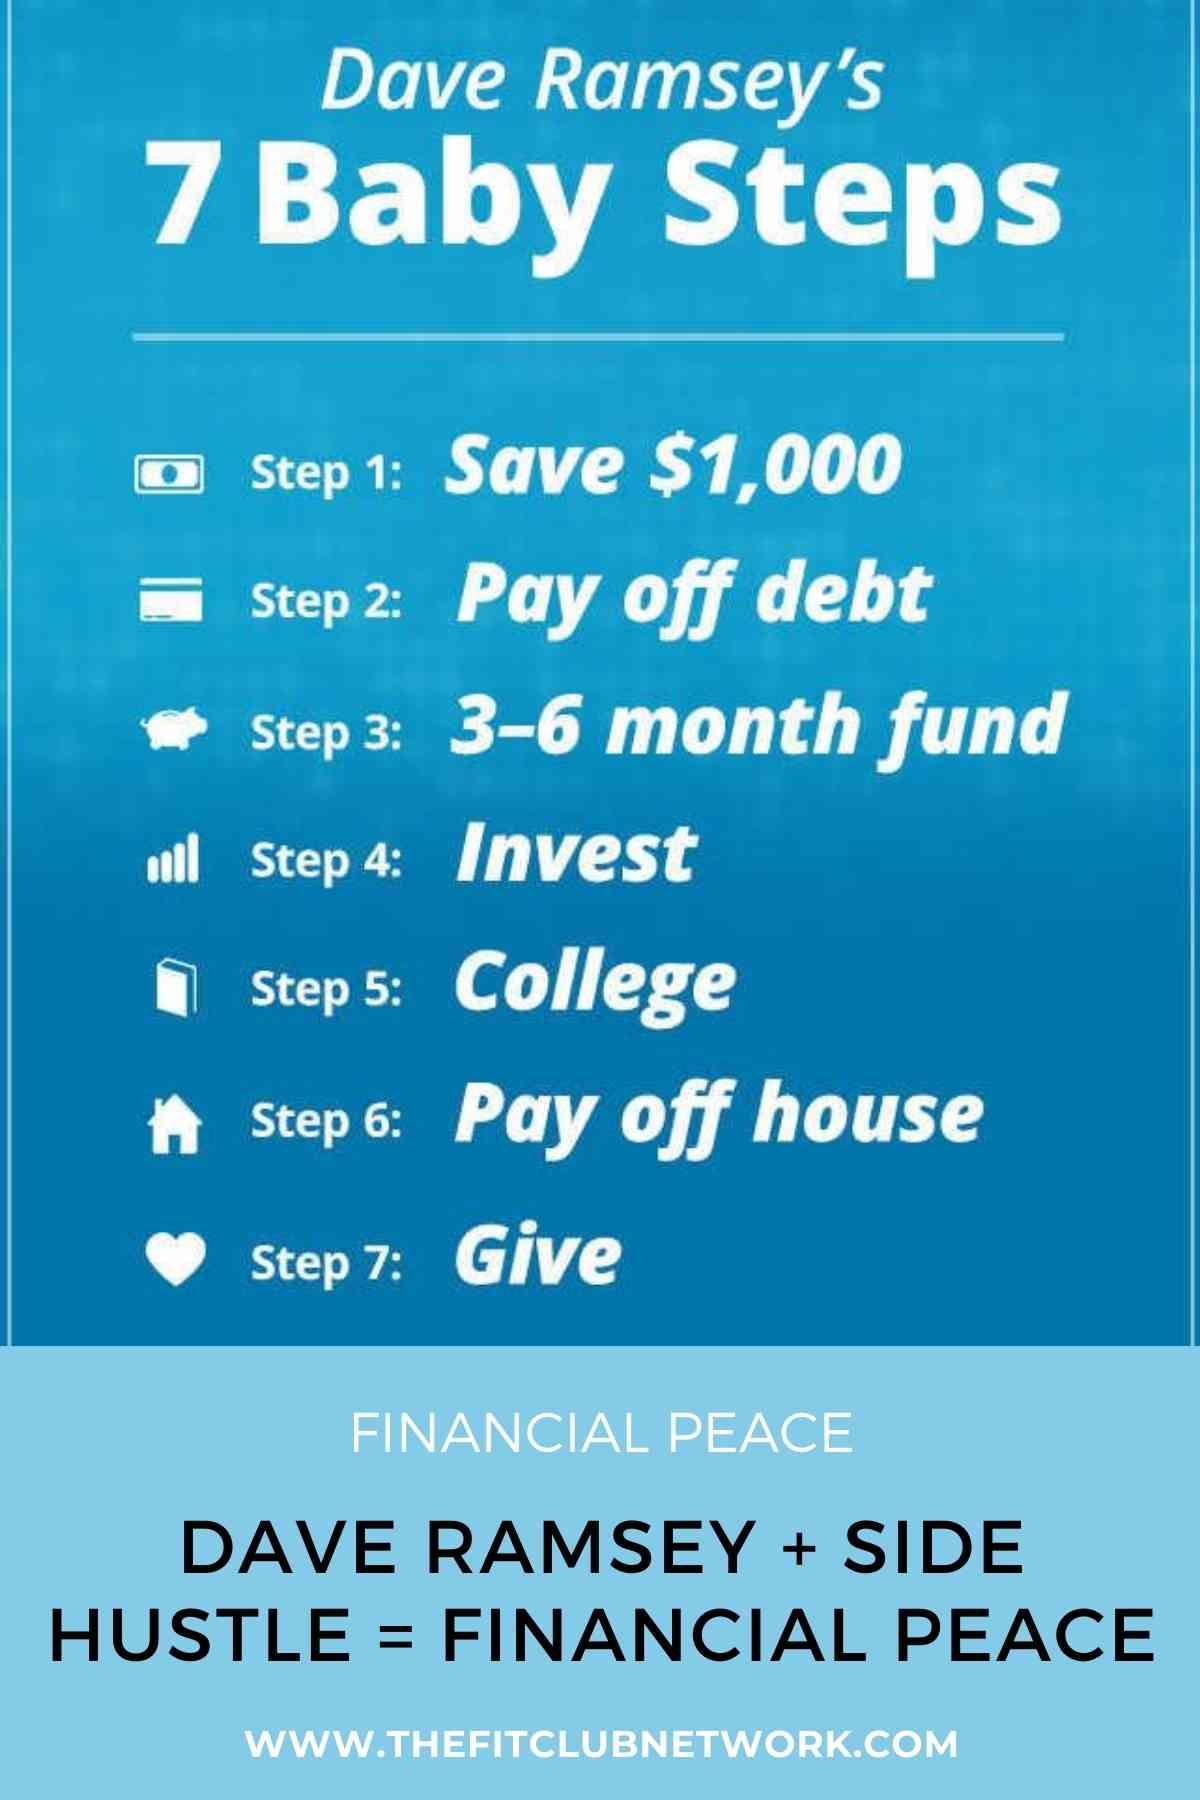 Dave Ramsey + Side Hustle = Financial Peace | THEFITCLUBNETWORK.COM